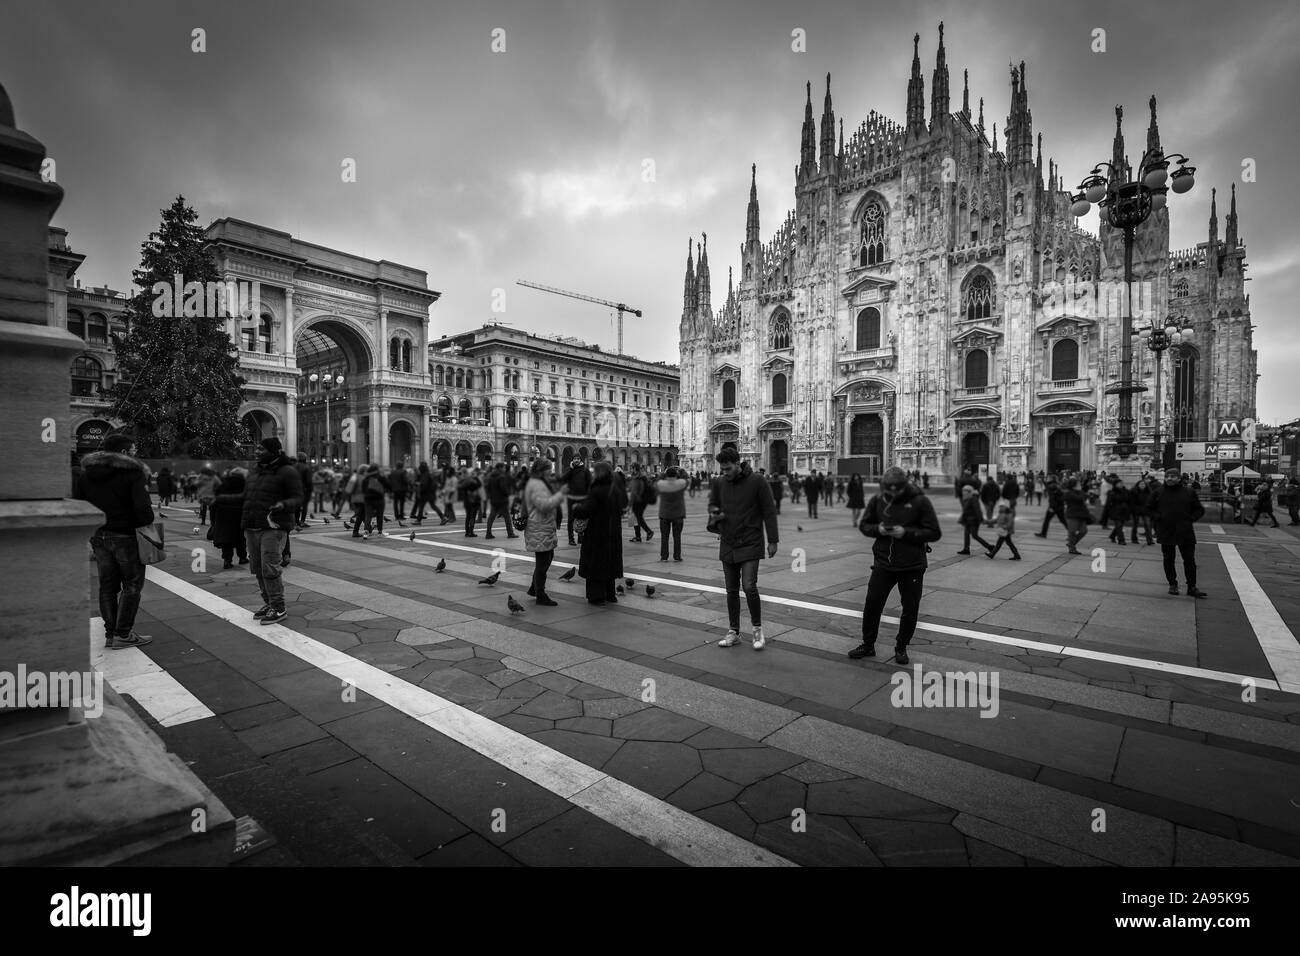 Milano travel poster Black and White Stock Photos & Images - Alamy